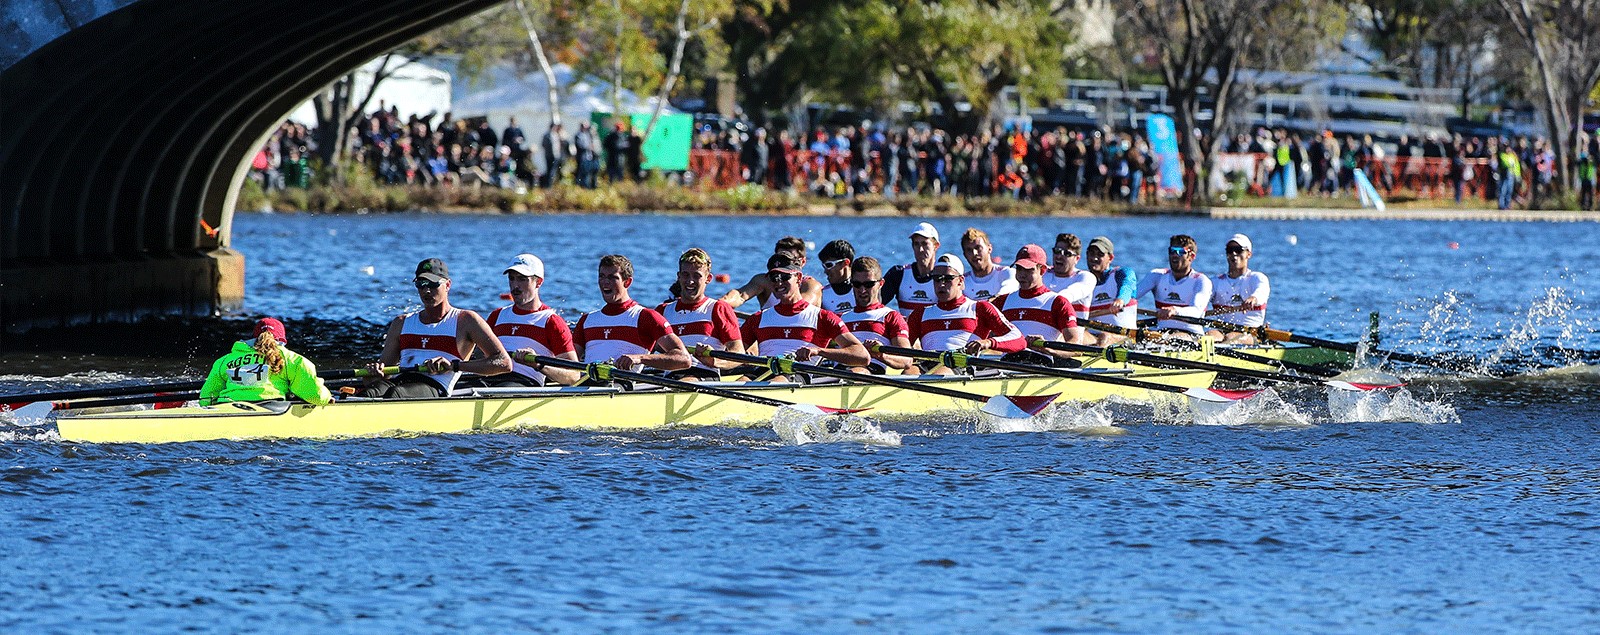 Head Of The Charles Regatta Begins Preparations for This Year’s Race